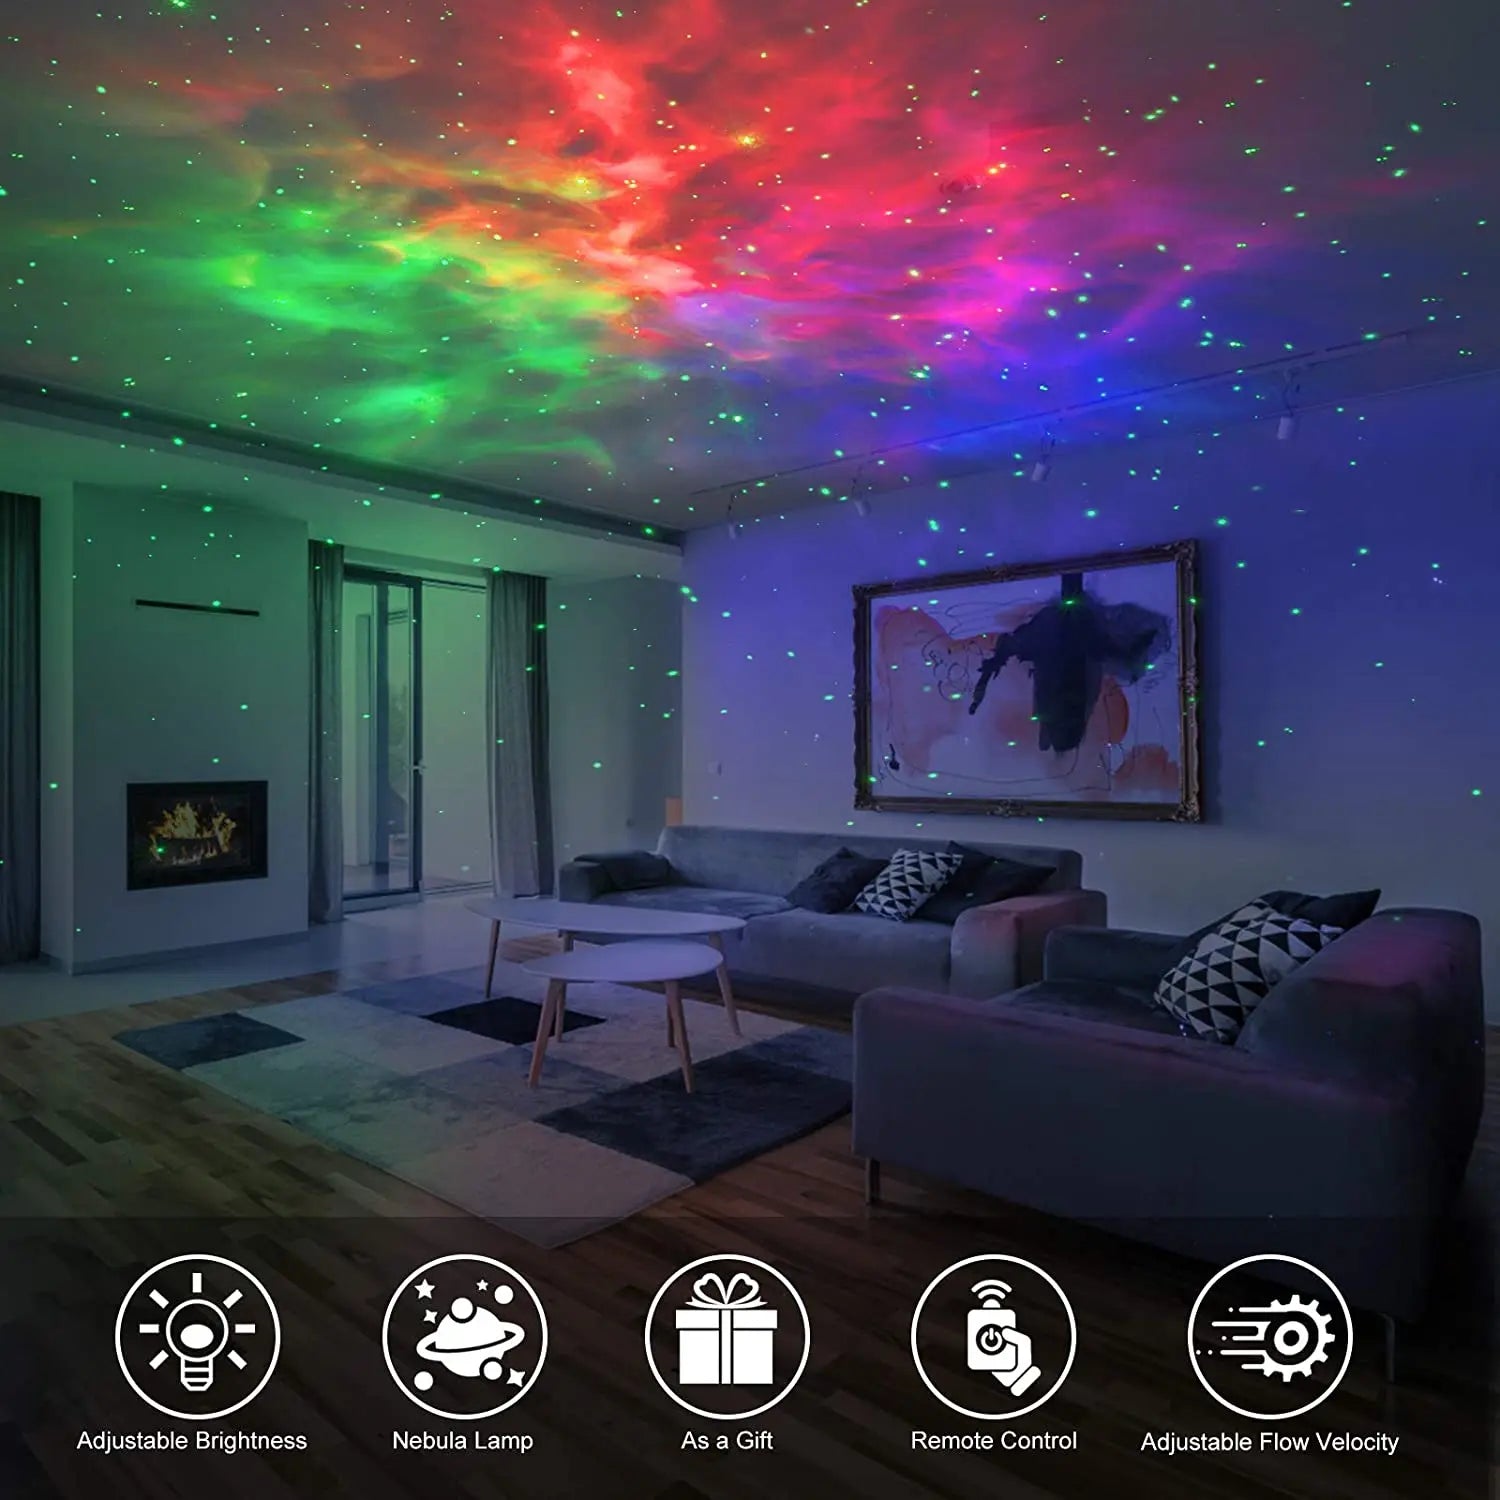 A modern living room illuminated by a Soulful Trading Galaxy Projector casting stars and a nebula-like glow on the ceiling and walls, with icons indicating lamp features below.